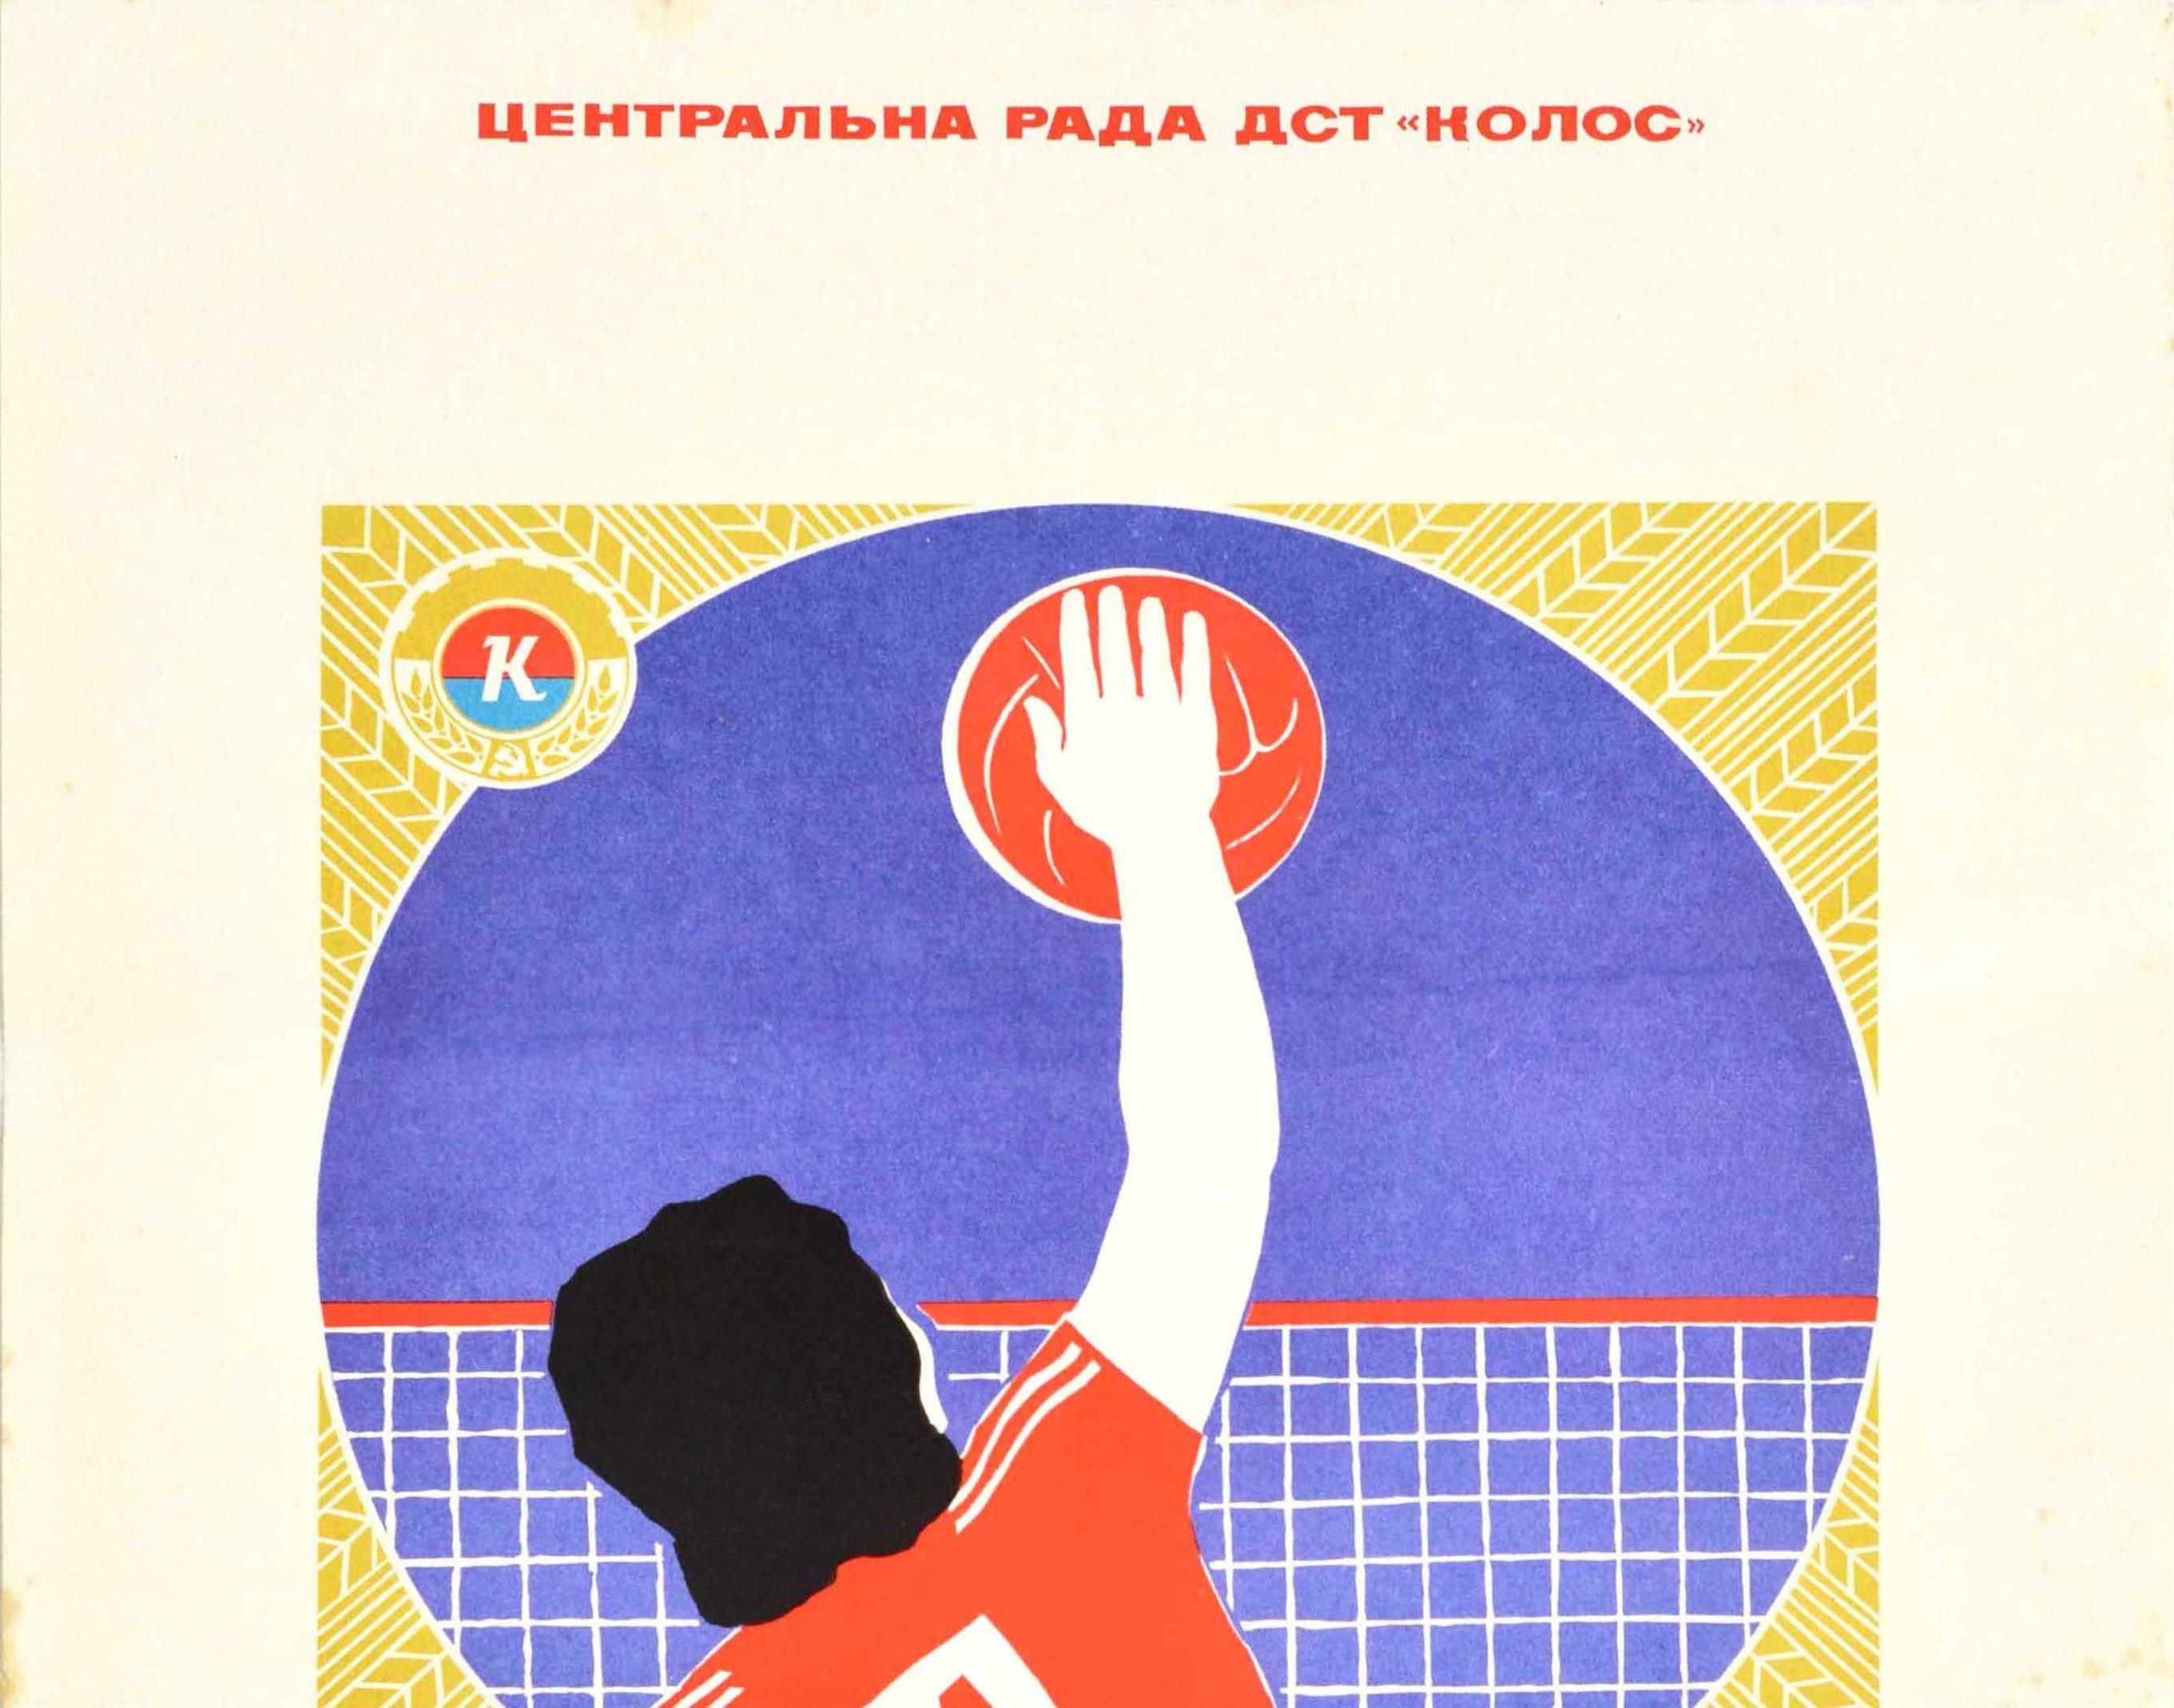 Original vintage sport poster for ???????? / Volleyball featuring an image in a circle of a player wearing a number 4 top hitting the ball over the net set within a blue and yellow wheat square with the logo at the top and the text on the border